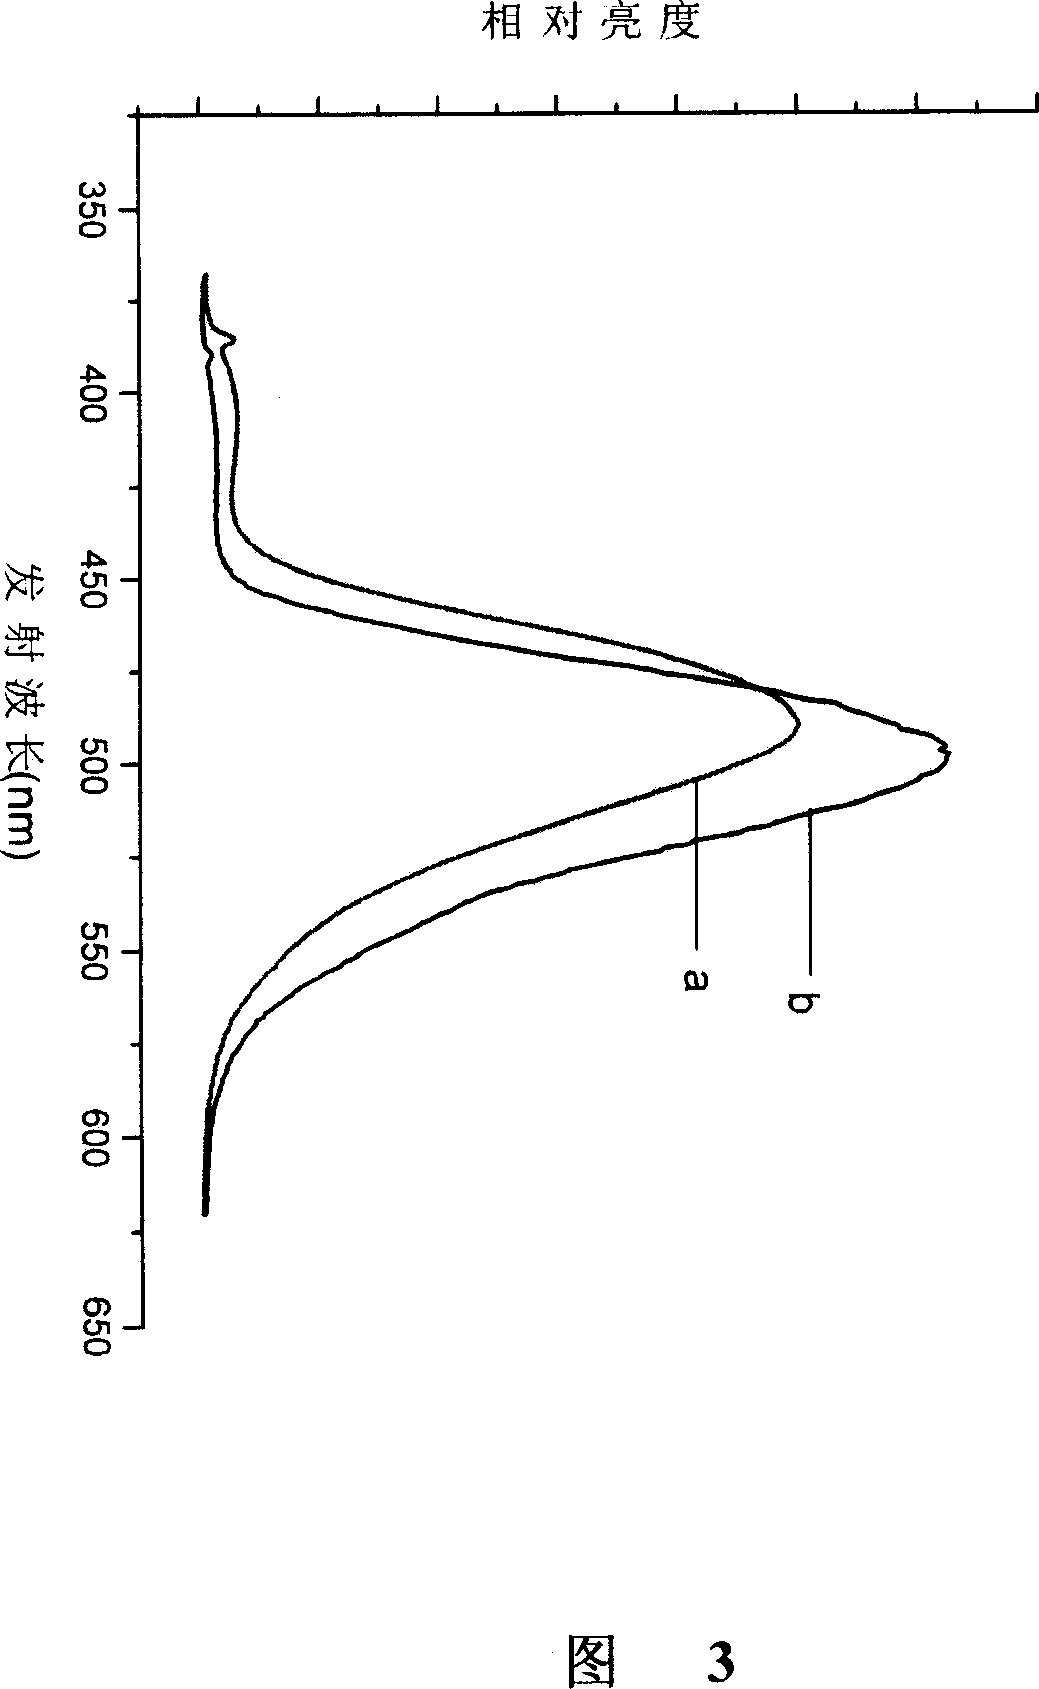 Long-persistence luminescent material and its preparing method